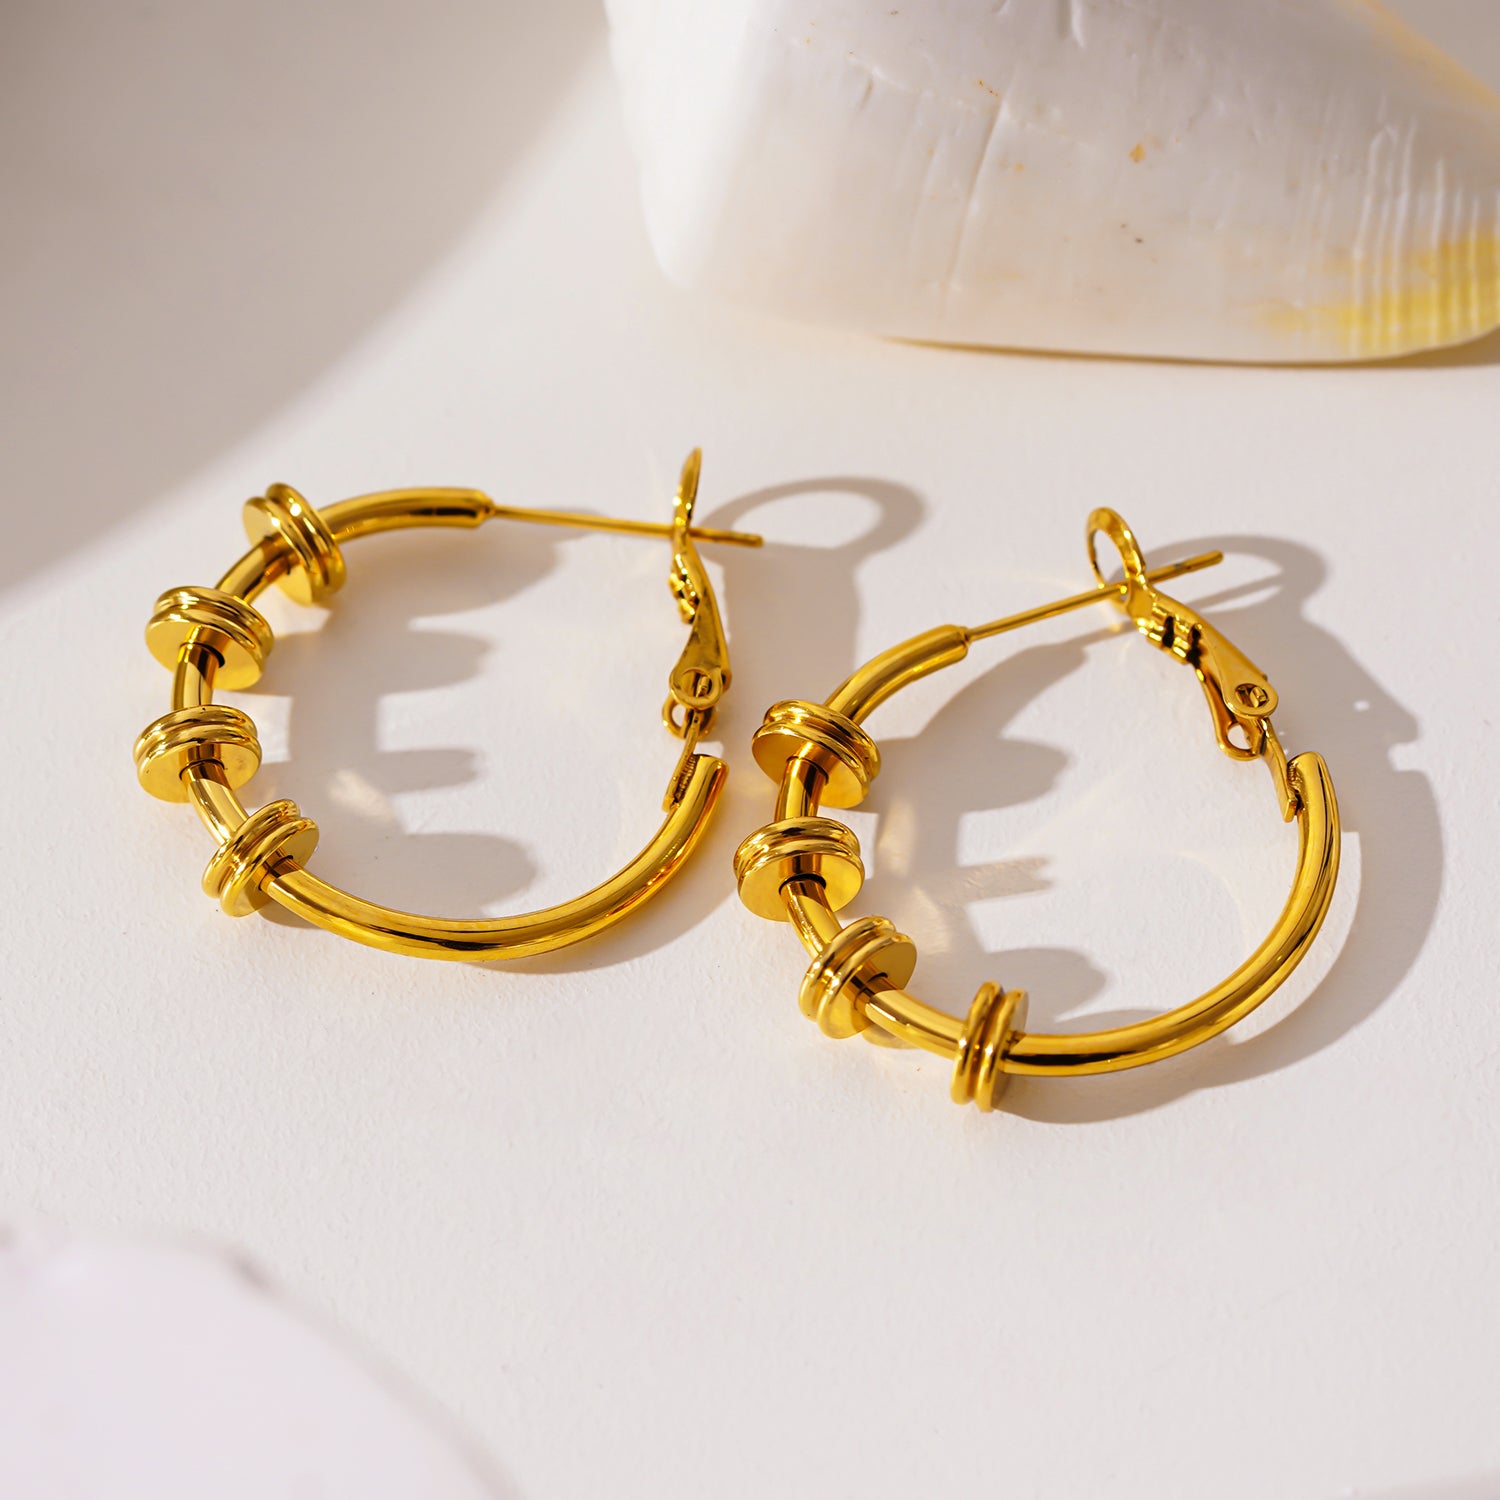 Style MINATO 5336: Modernist Hoop Earrings Anchoring Industrial-Chic Double Discs.